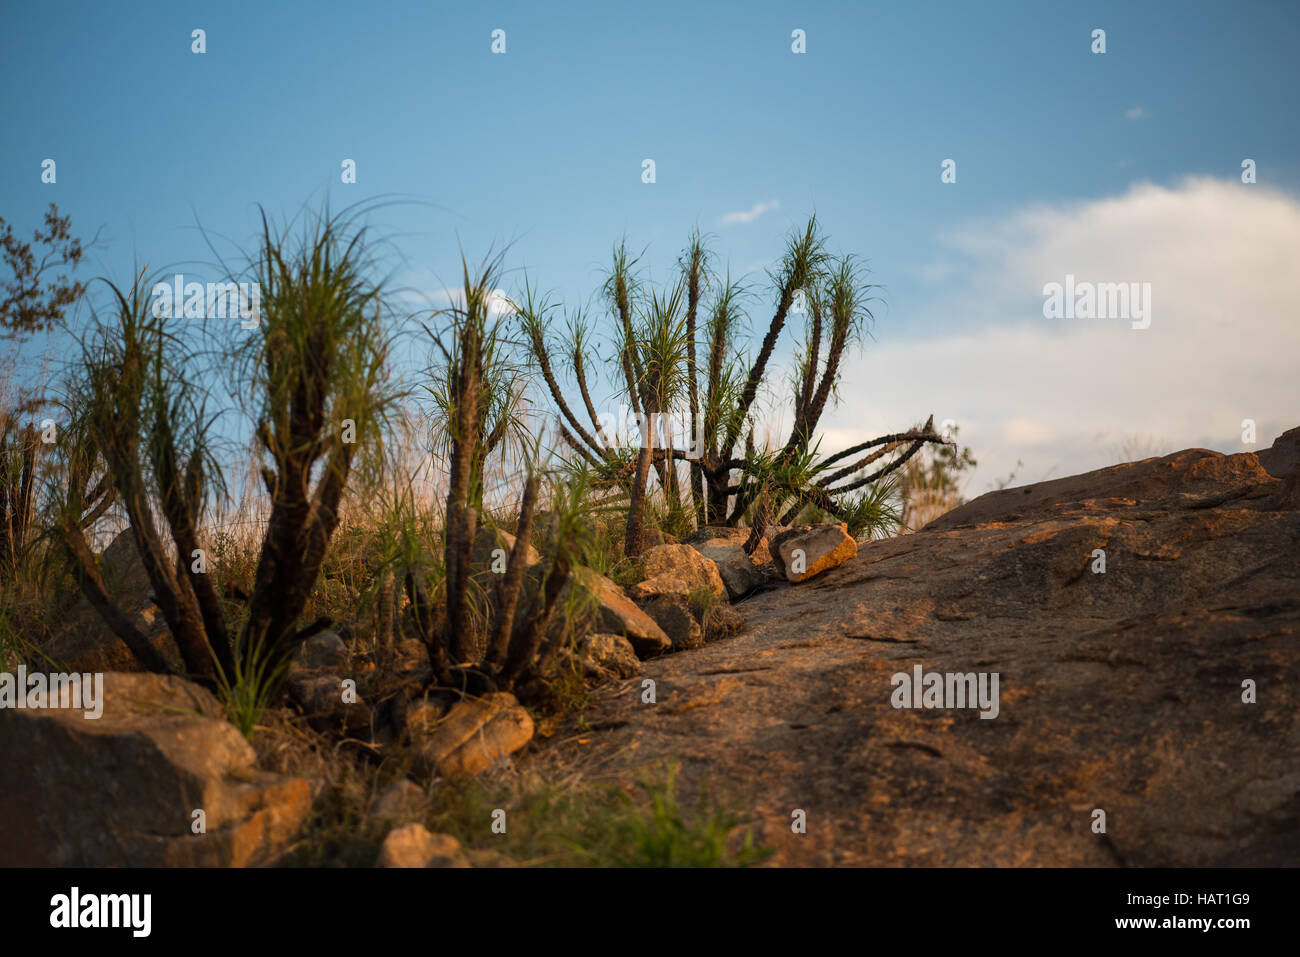 Scenic landscape of baboons tail plants growing in among rock on a rocky hilltop Stock Photo